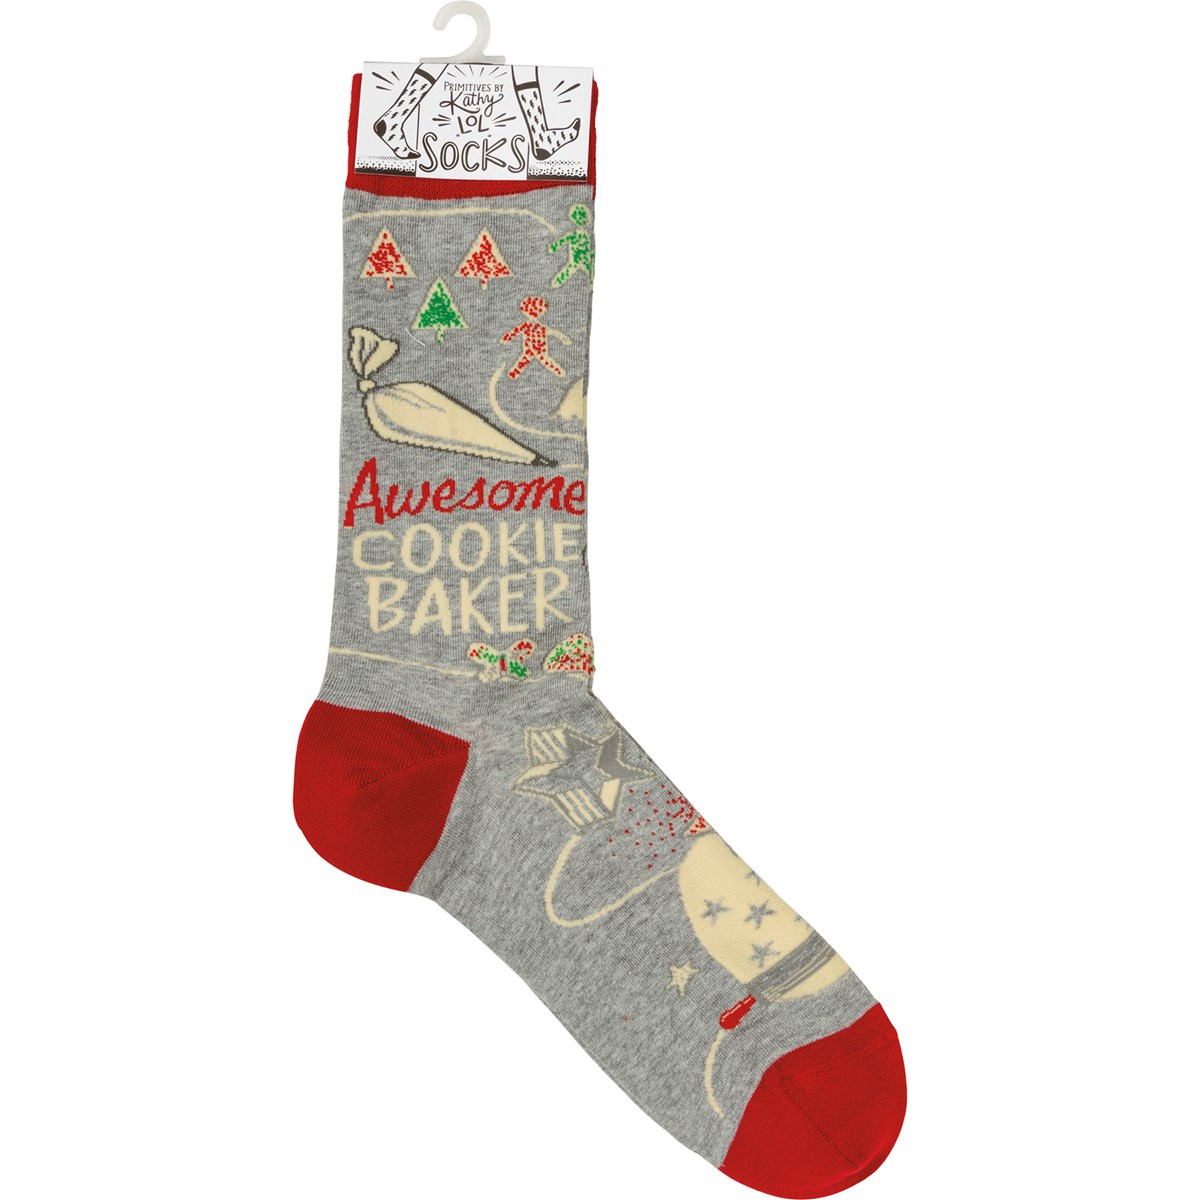 Socks - Awesome Cookie Baker - One Size Fits Most - Cotton, Nylon, Spandex